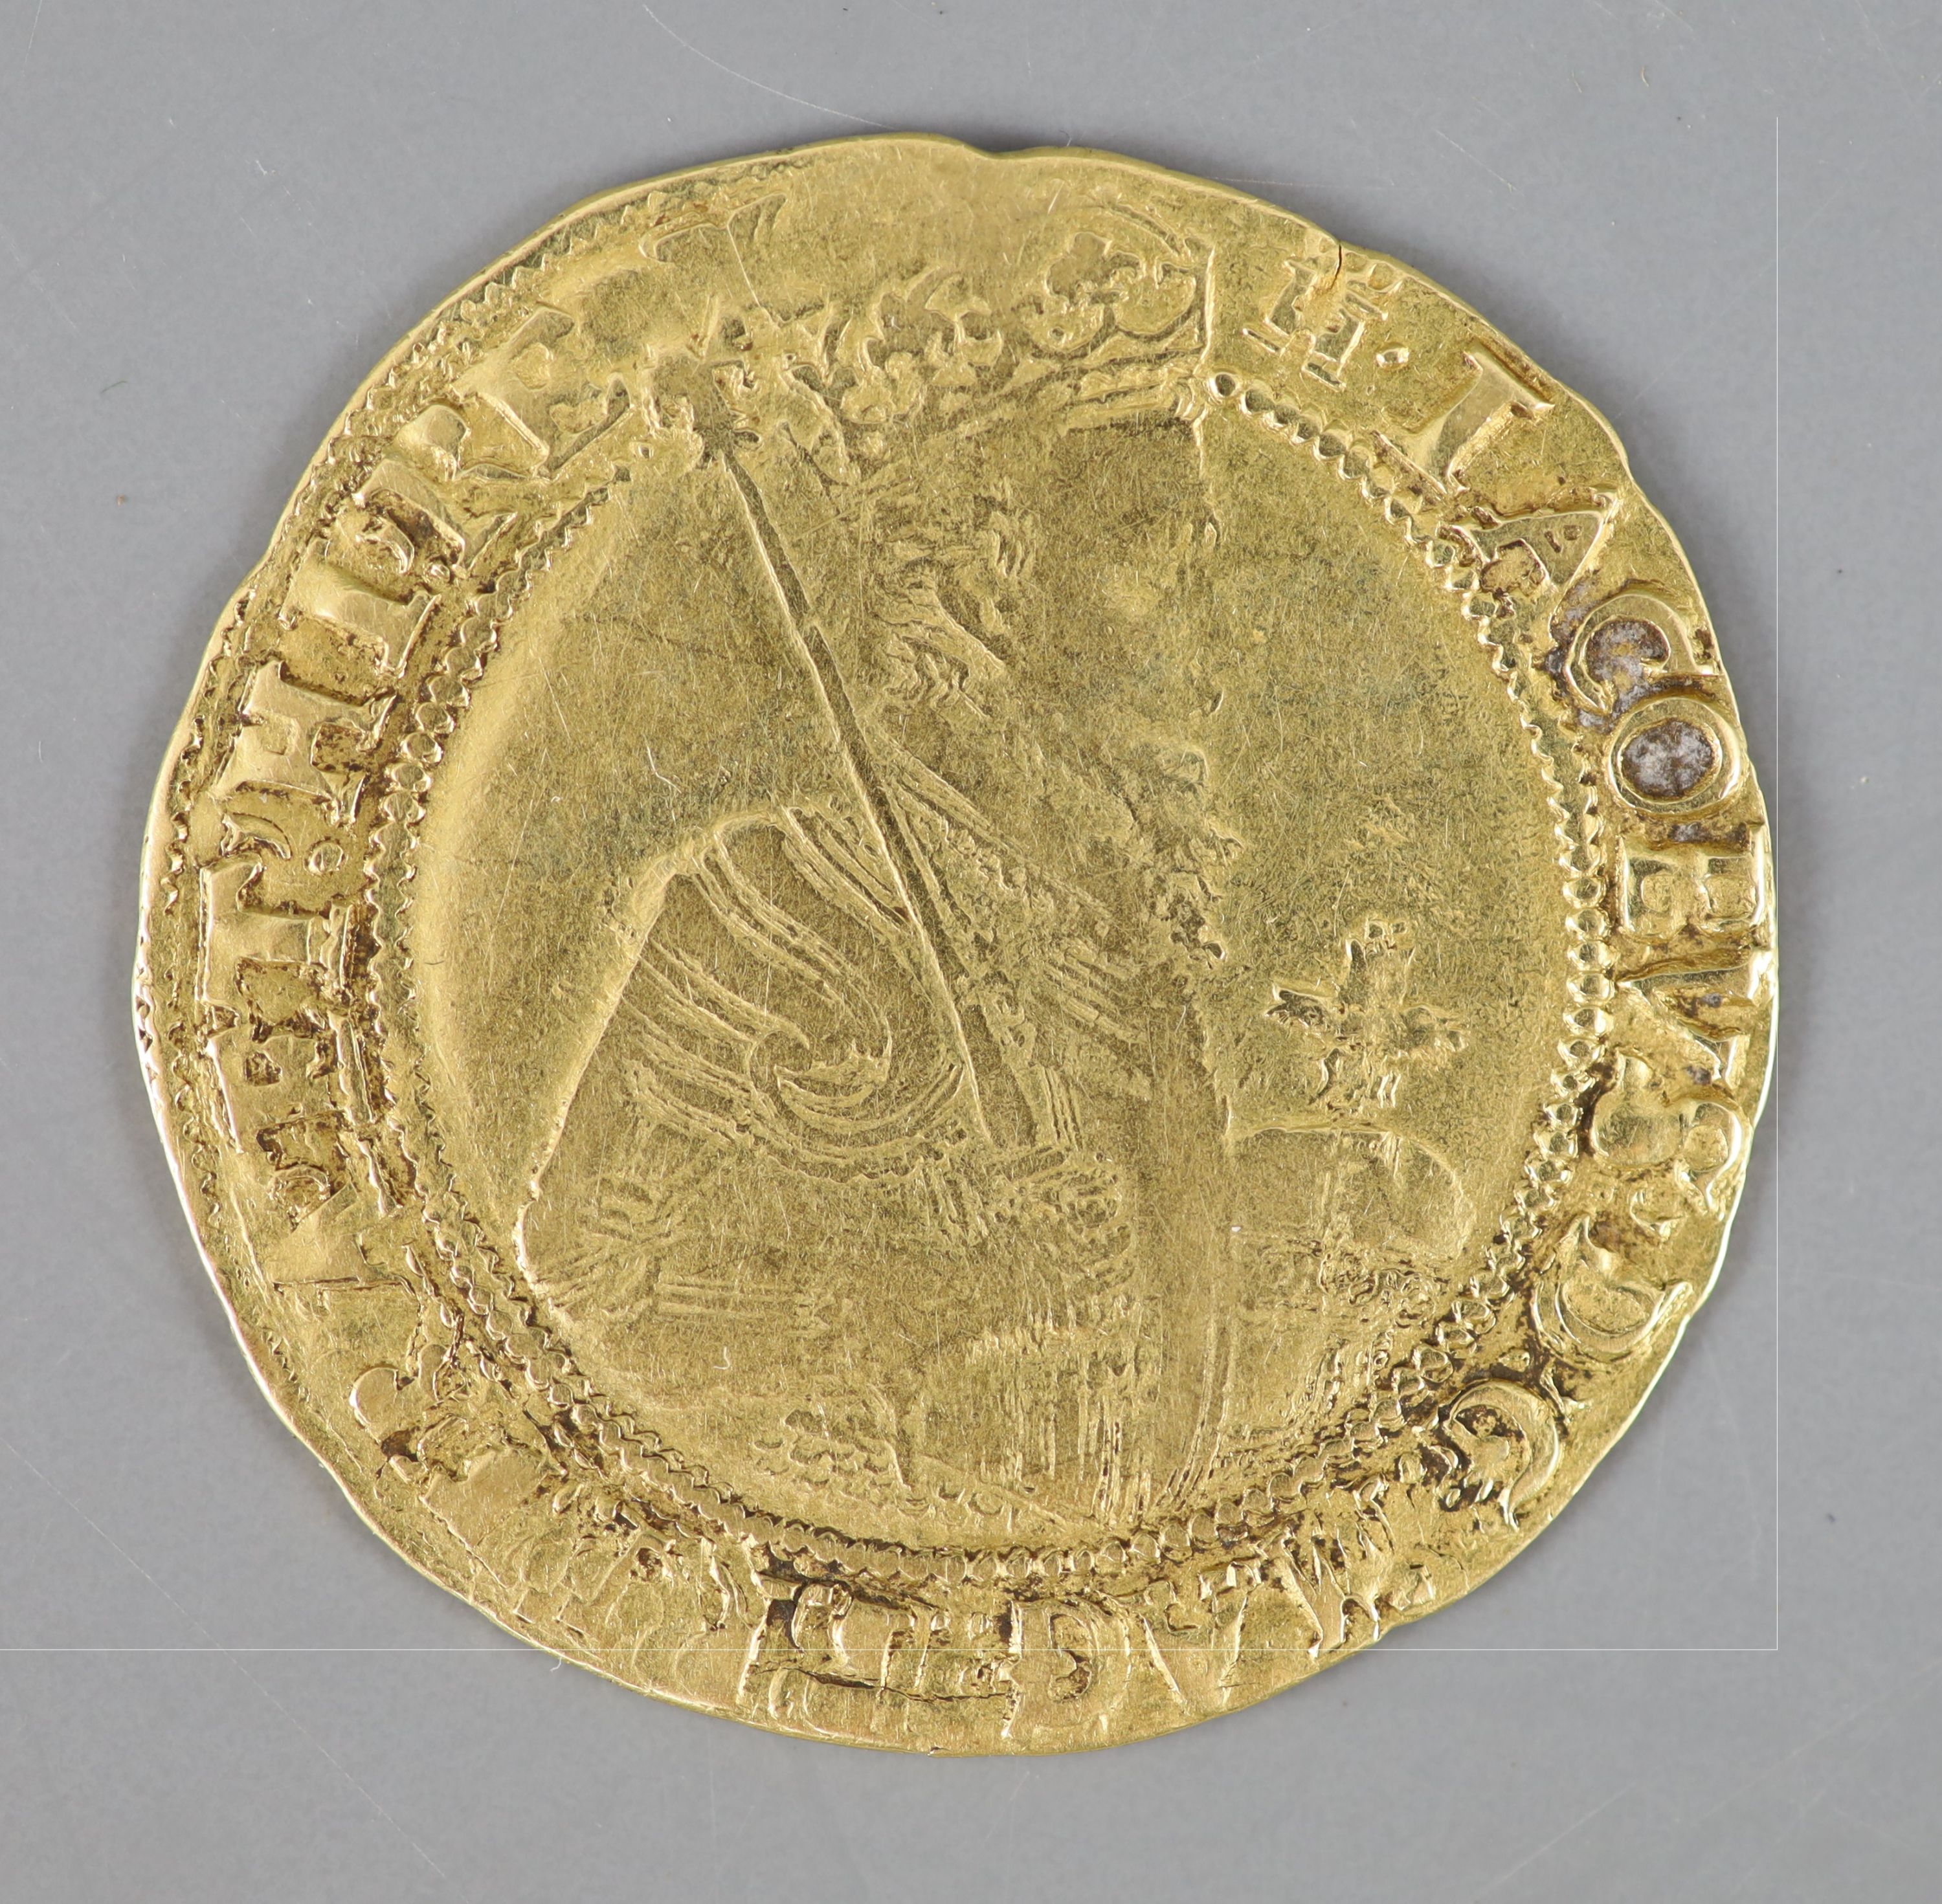 A James I gold Unite coin, fourth bust, 1612-13, mm. Tower, slight crease with weakness to the area,